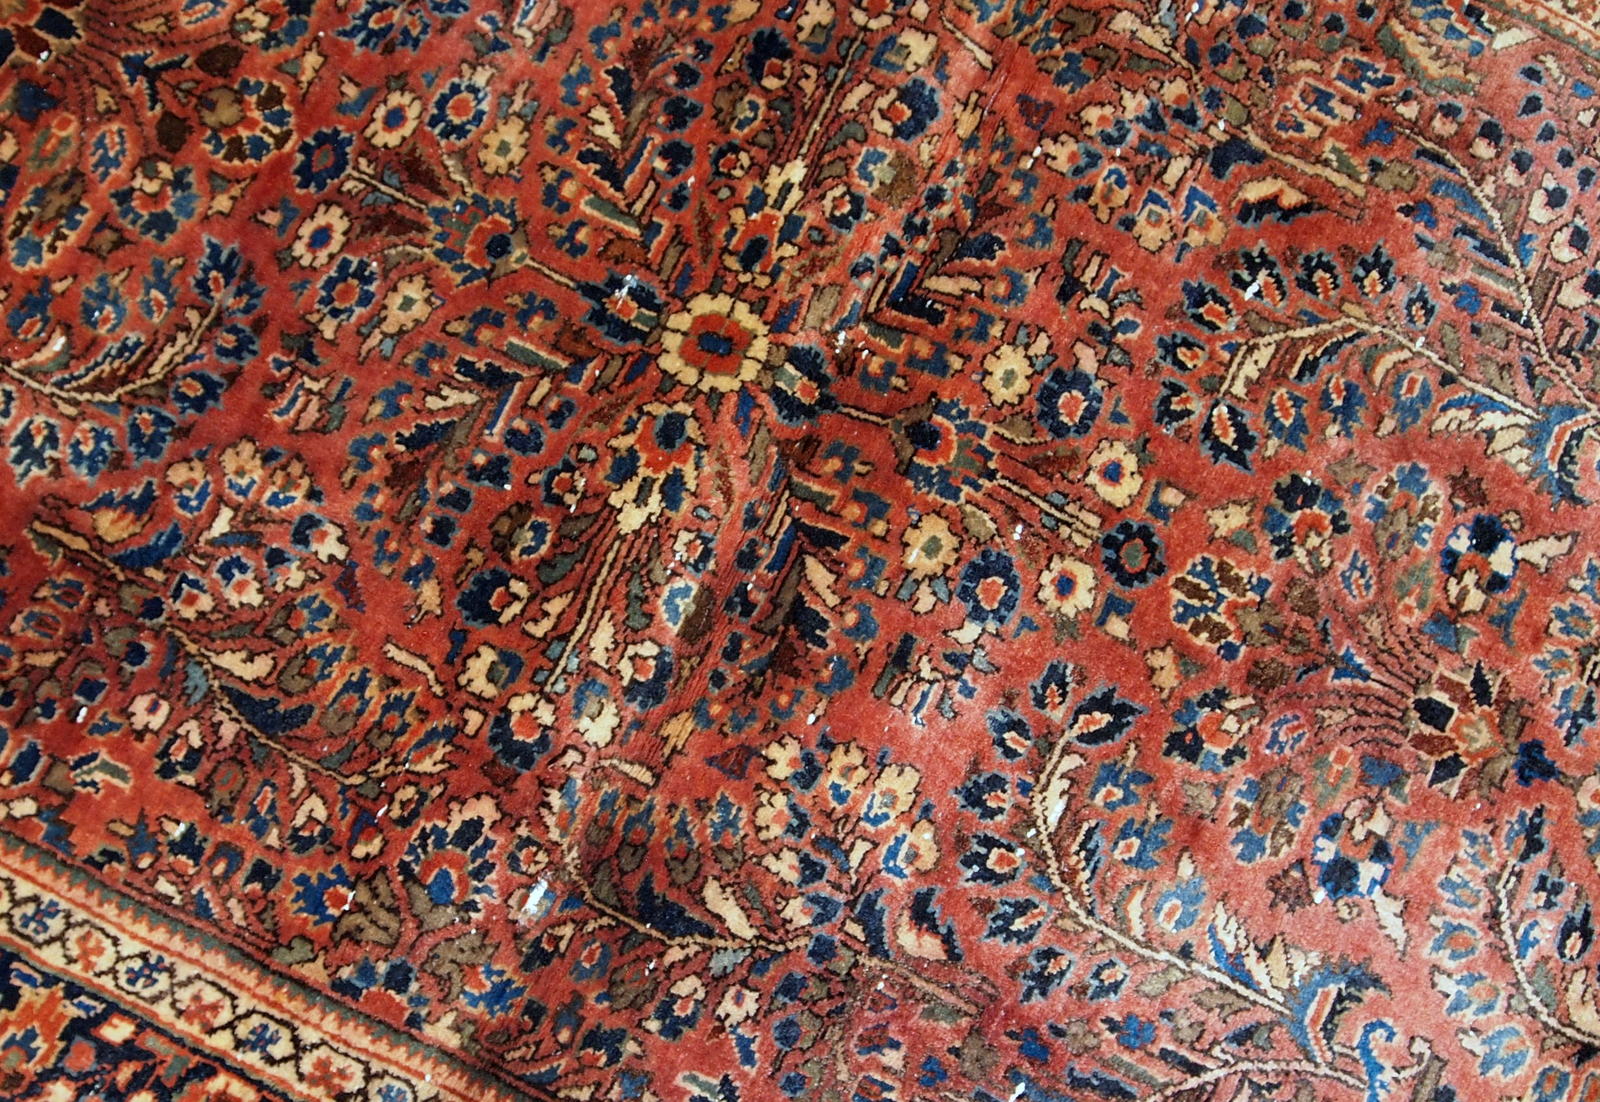 Hand-weaved antique Sarouk rug from the beginning of 20th century. The rug is in original good condition, made in classic floral design.